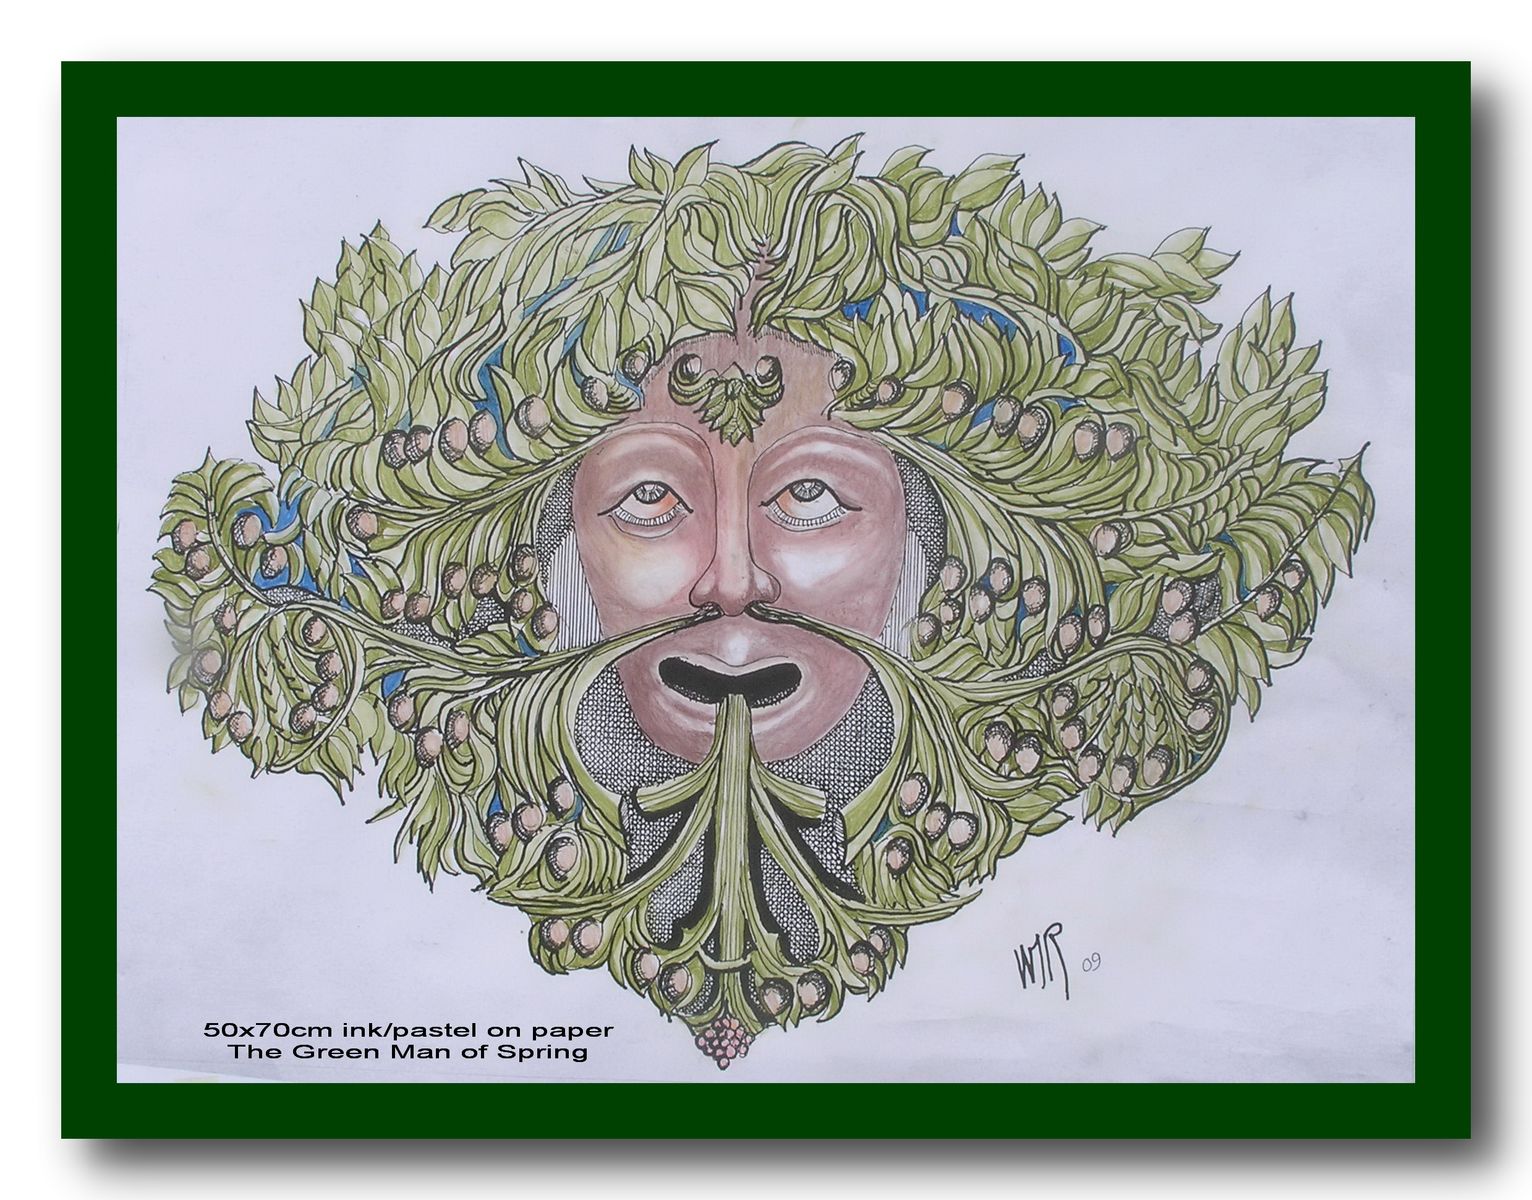 The Green Man of Spring 2